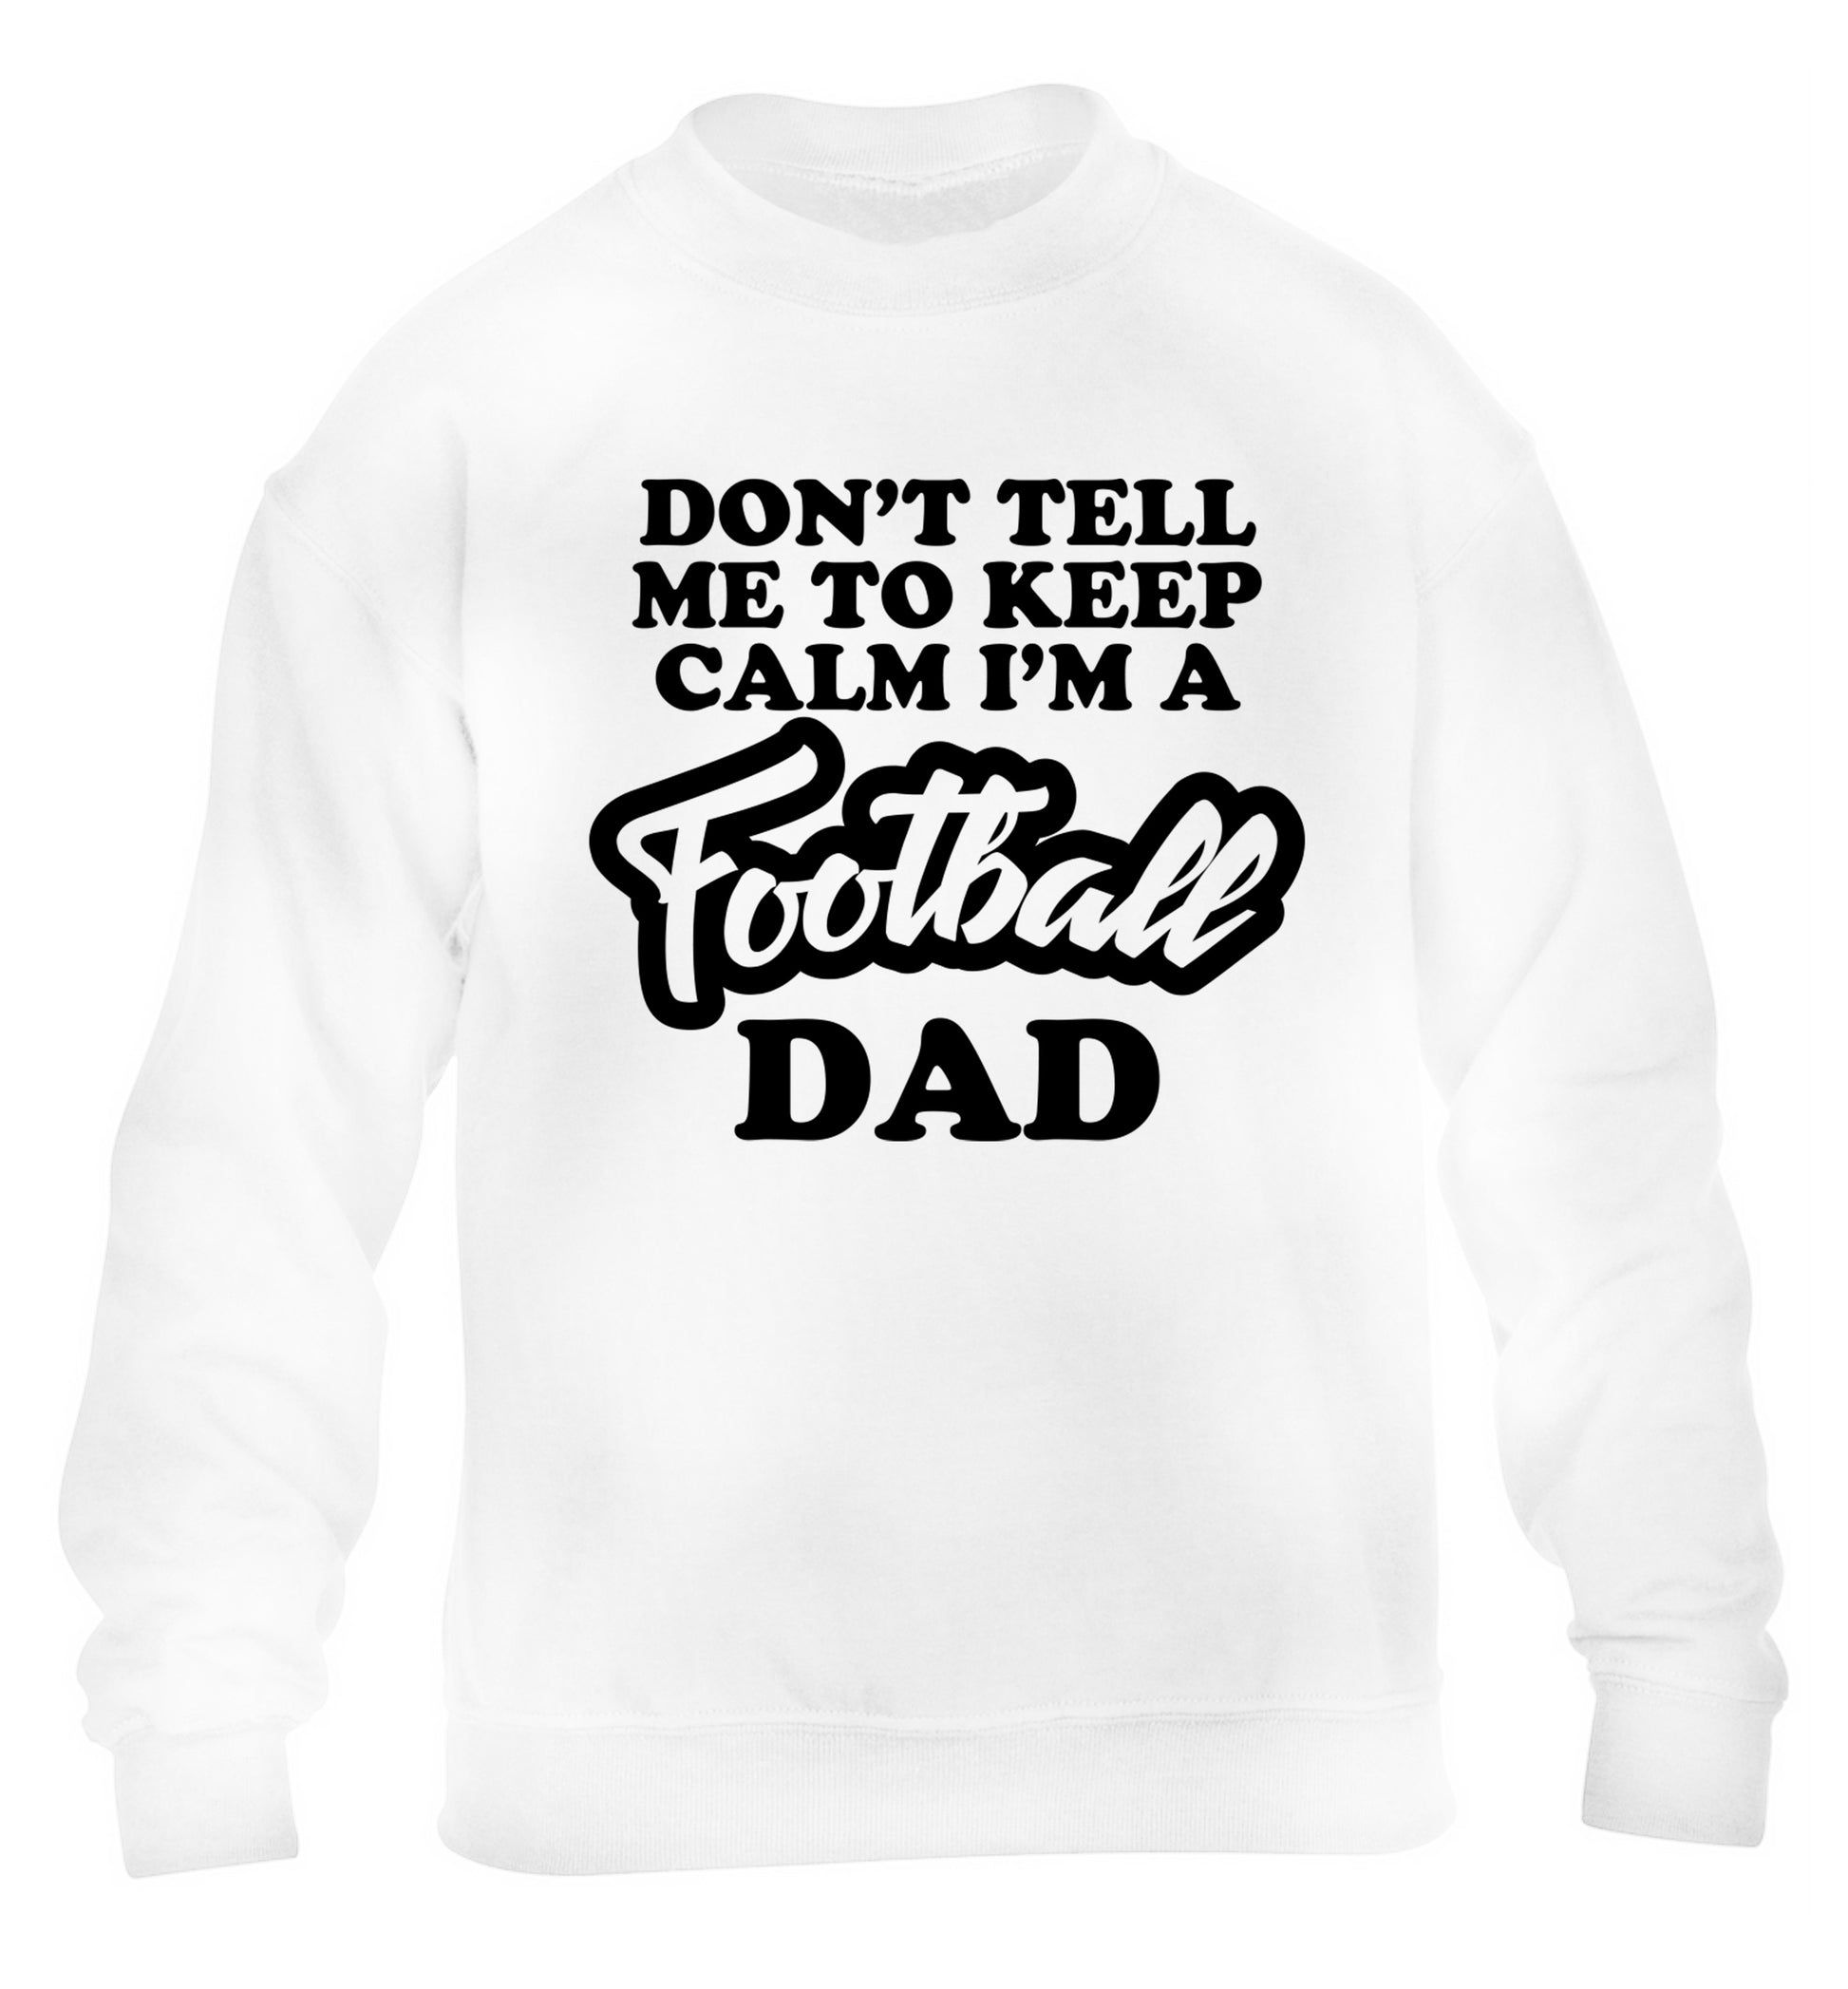 Don't tell me to keep calm I'm a football dad children's white sweater 12-14 Years